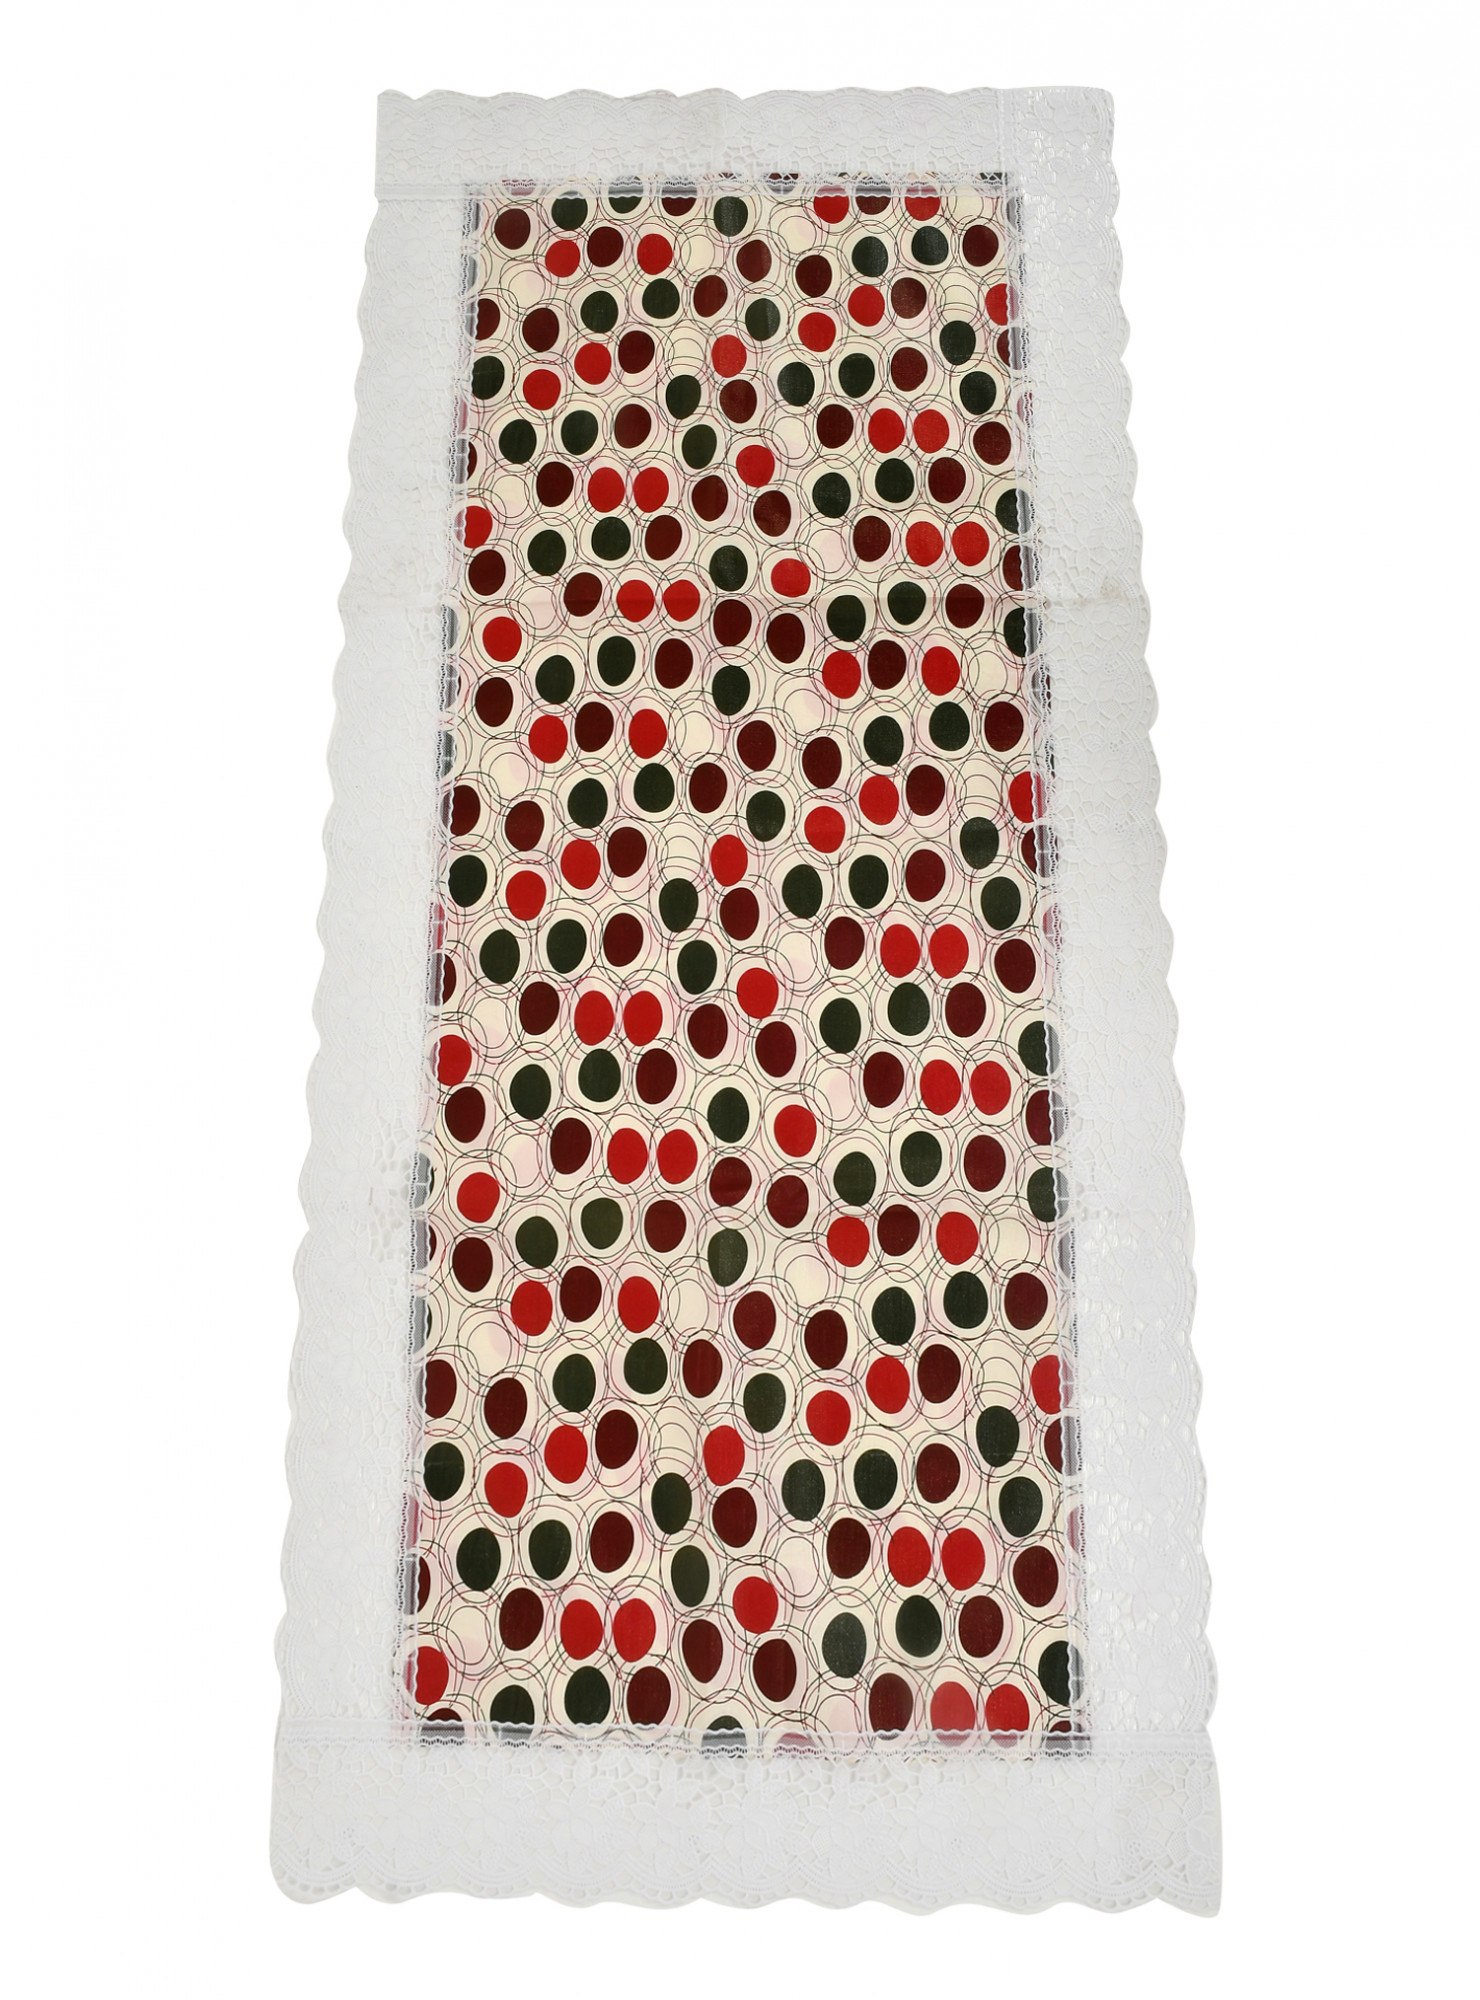 Kuber Industries Circle Design PVC Table Runner For Farmhouse Dinner, Holiday Parties, Wedding, Events, Décor, 18